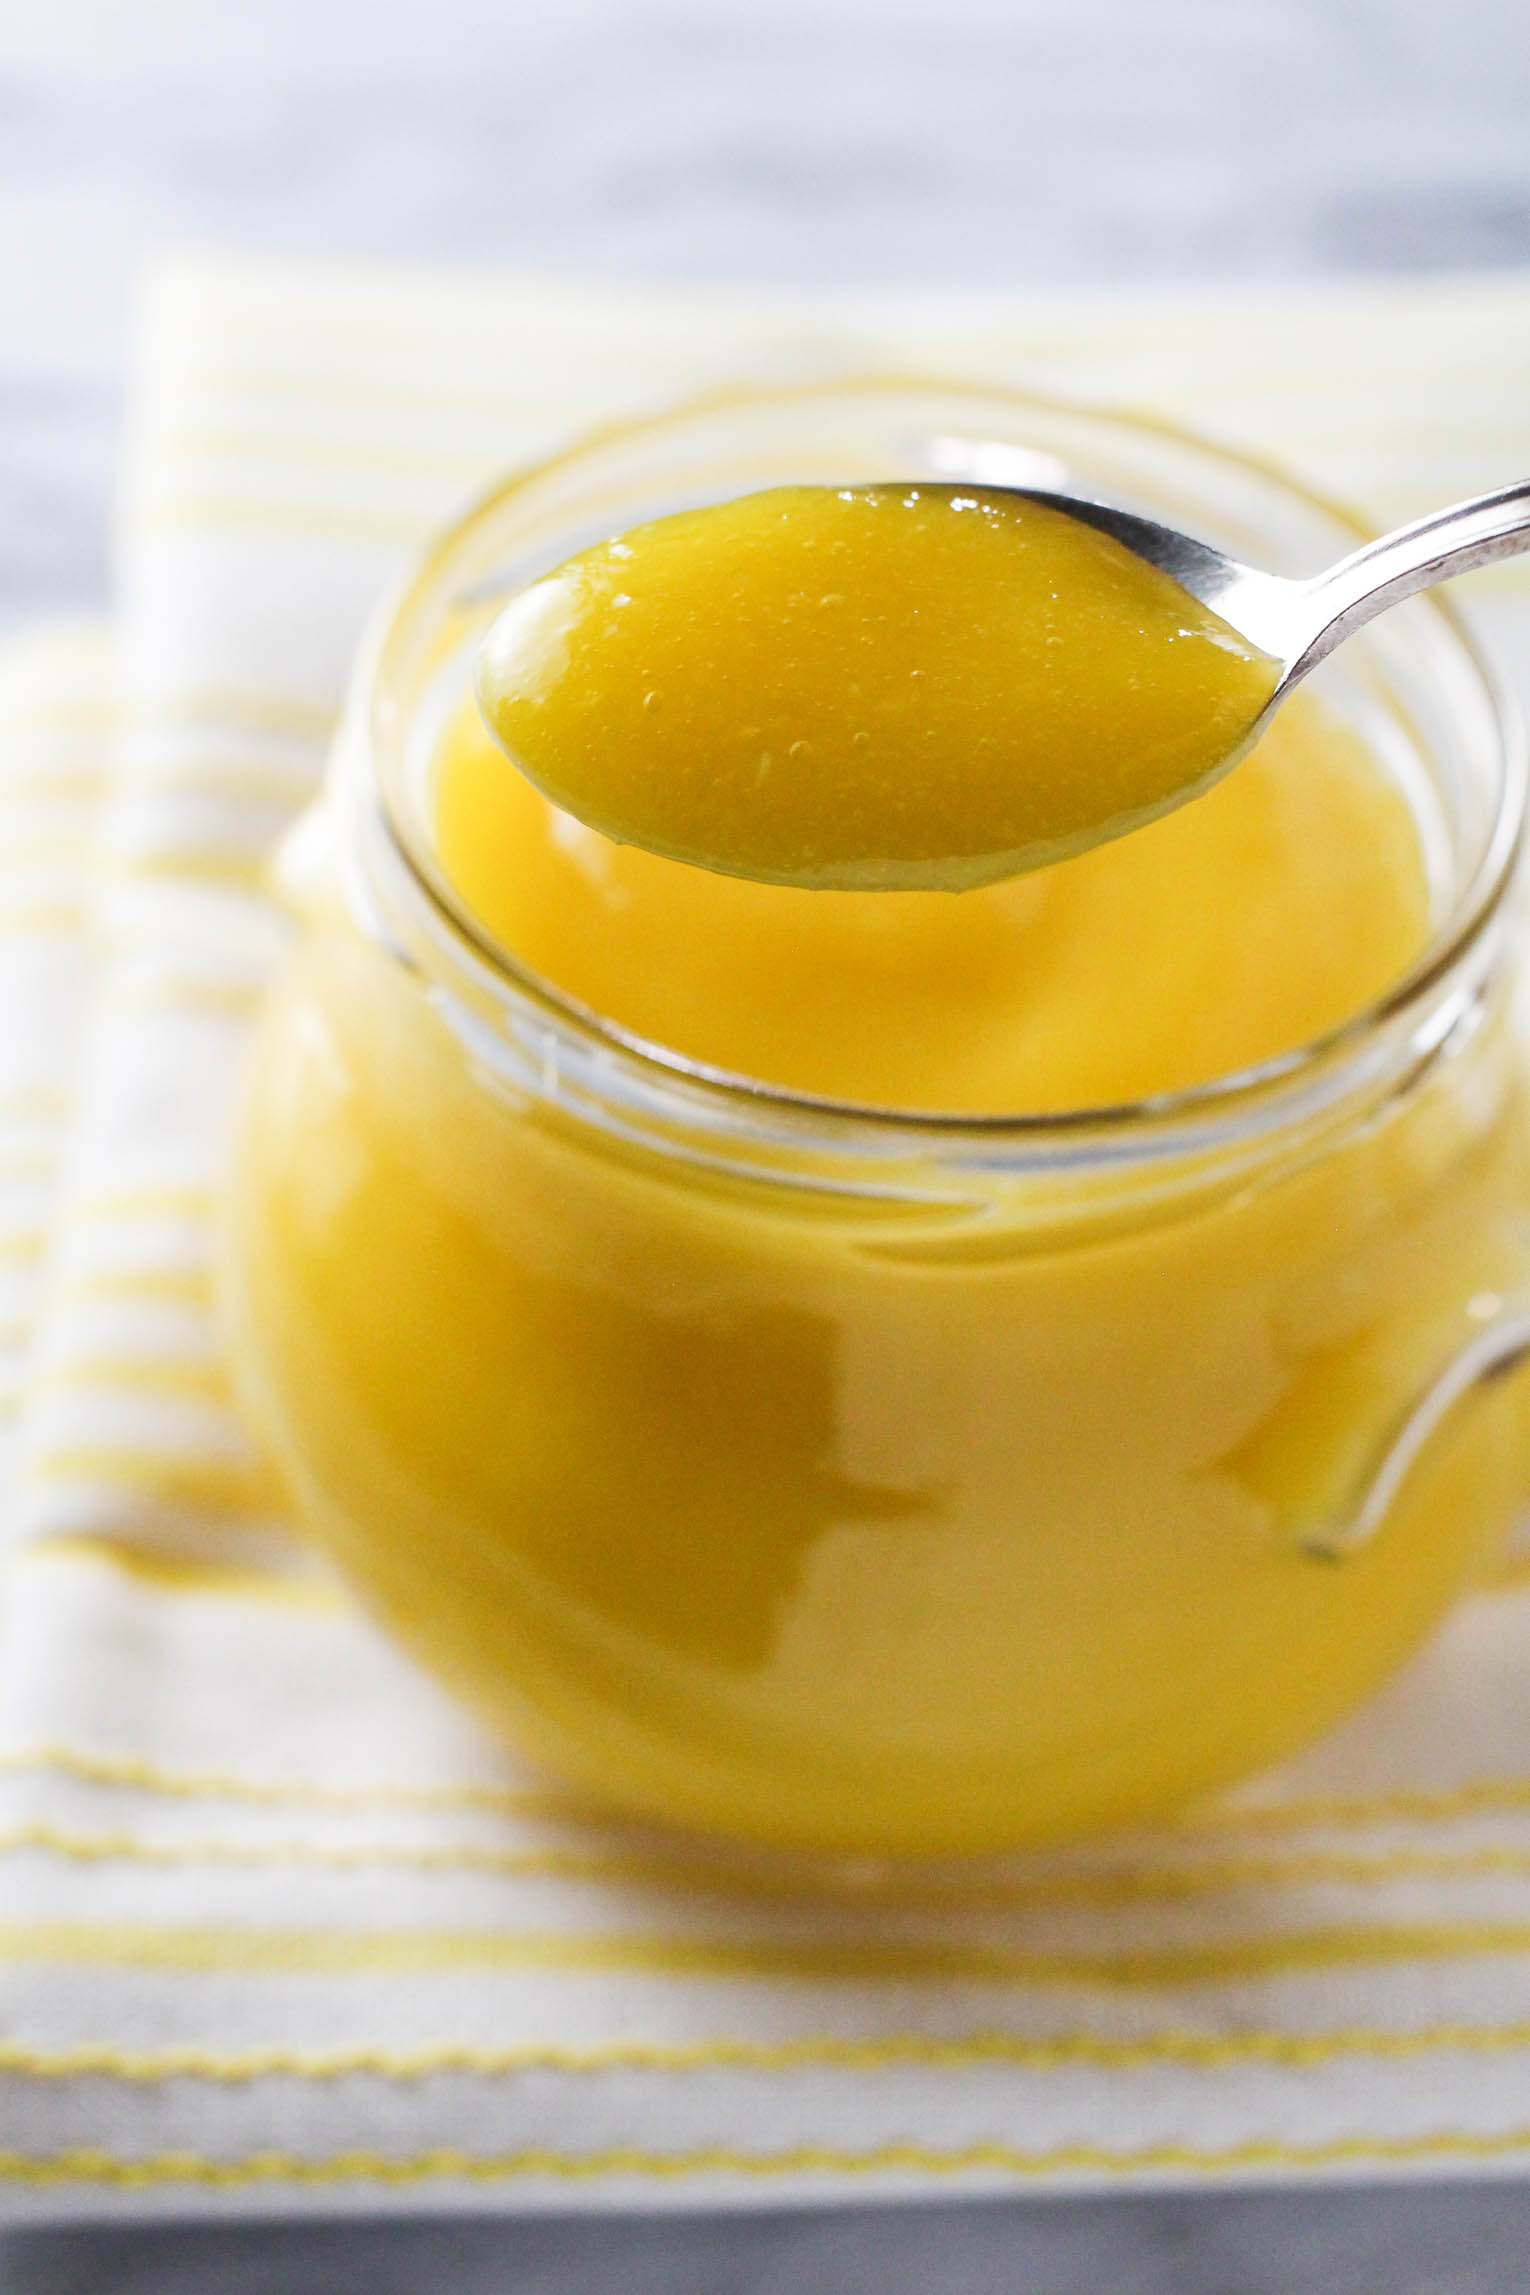 Close up shot of the mango puree being scooped out of a glass jar with a spoon.